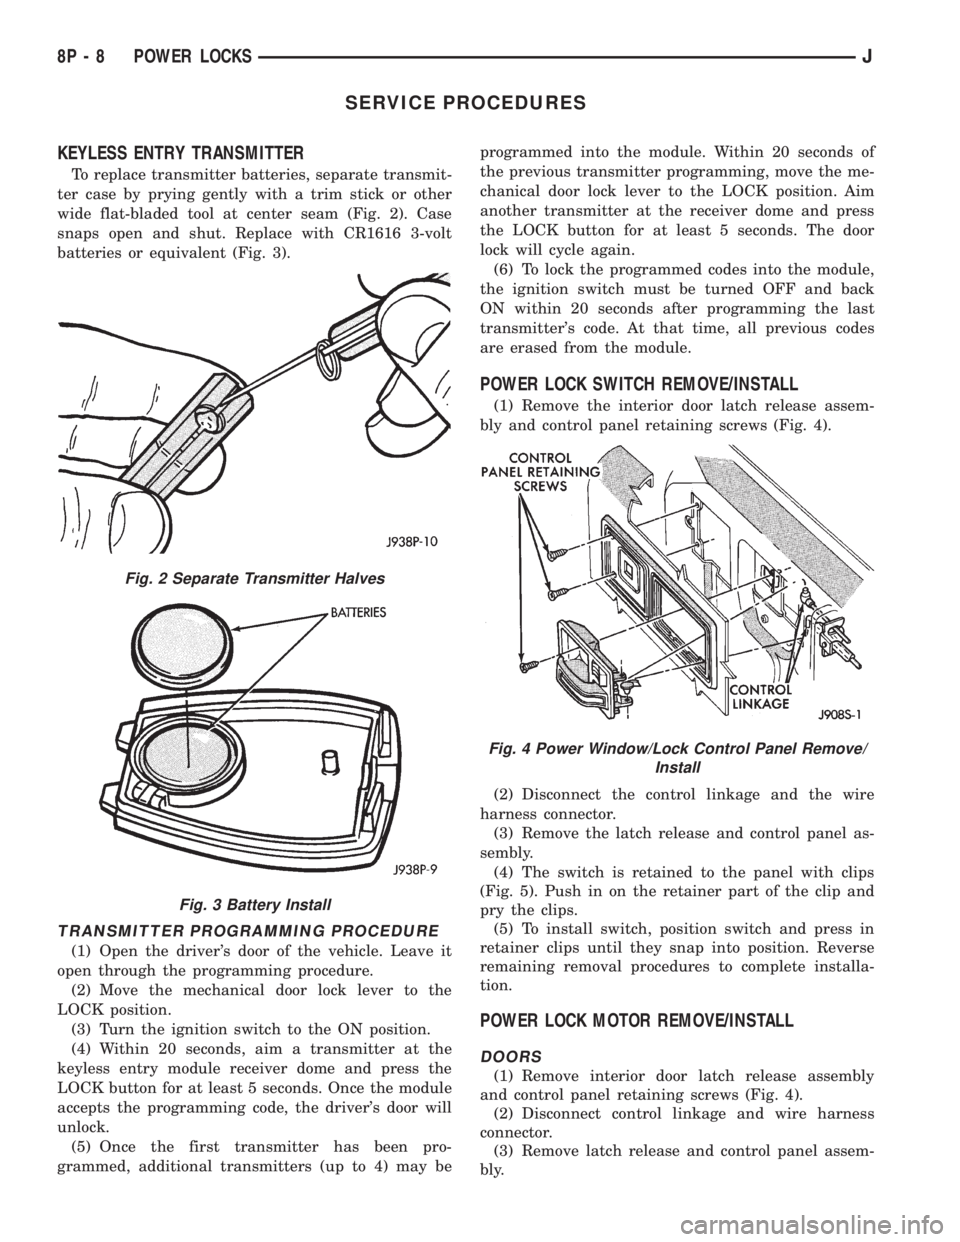 JEEP CHEROKEE 1995  Service Repair Manual SERVICE PROCEDURES
KEYLESS ENTRY TRANSMITTER
To replace transmitter batteries, separate transmit-
ter case by prying gently with a trim stick or other
wide flat-bladed tool at center seam (Fig. 2). Ca